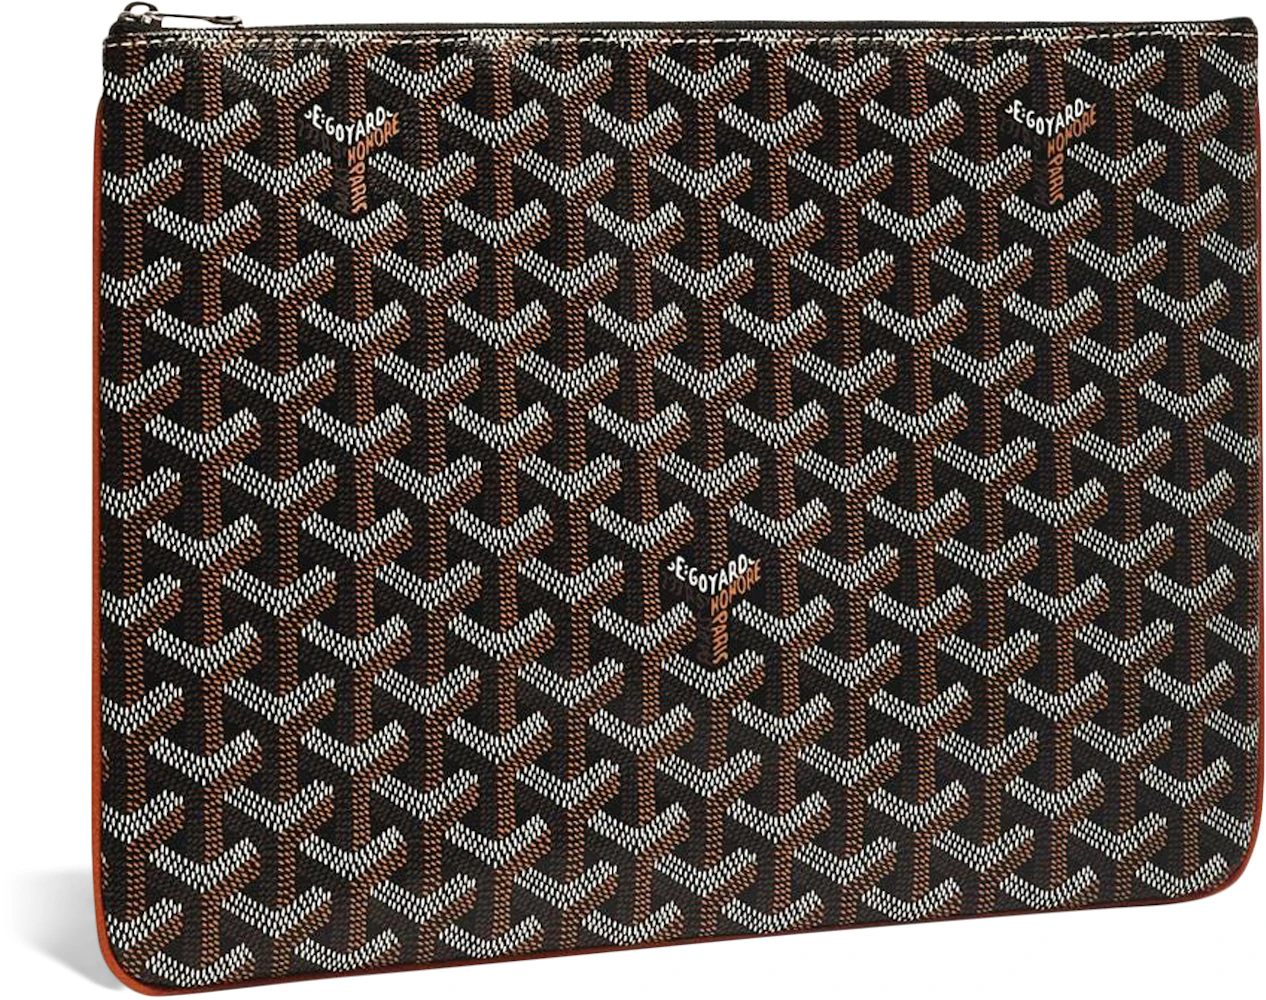 Goyard Conti Pouch Black/Brown in Coated Canvas with Palladium